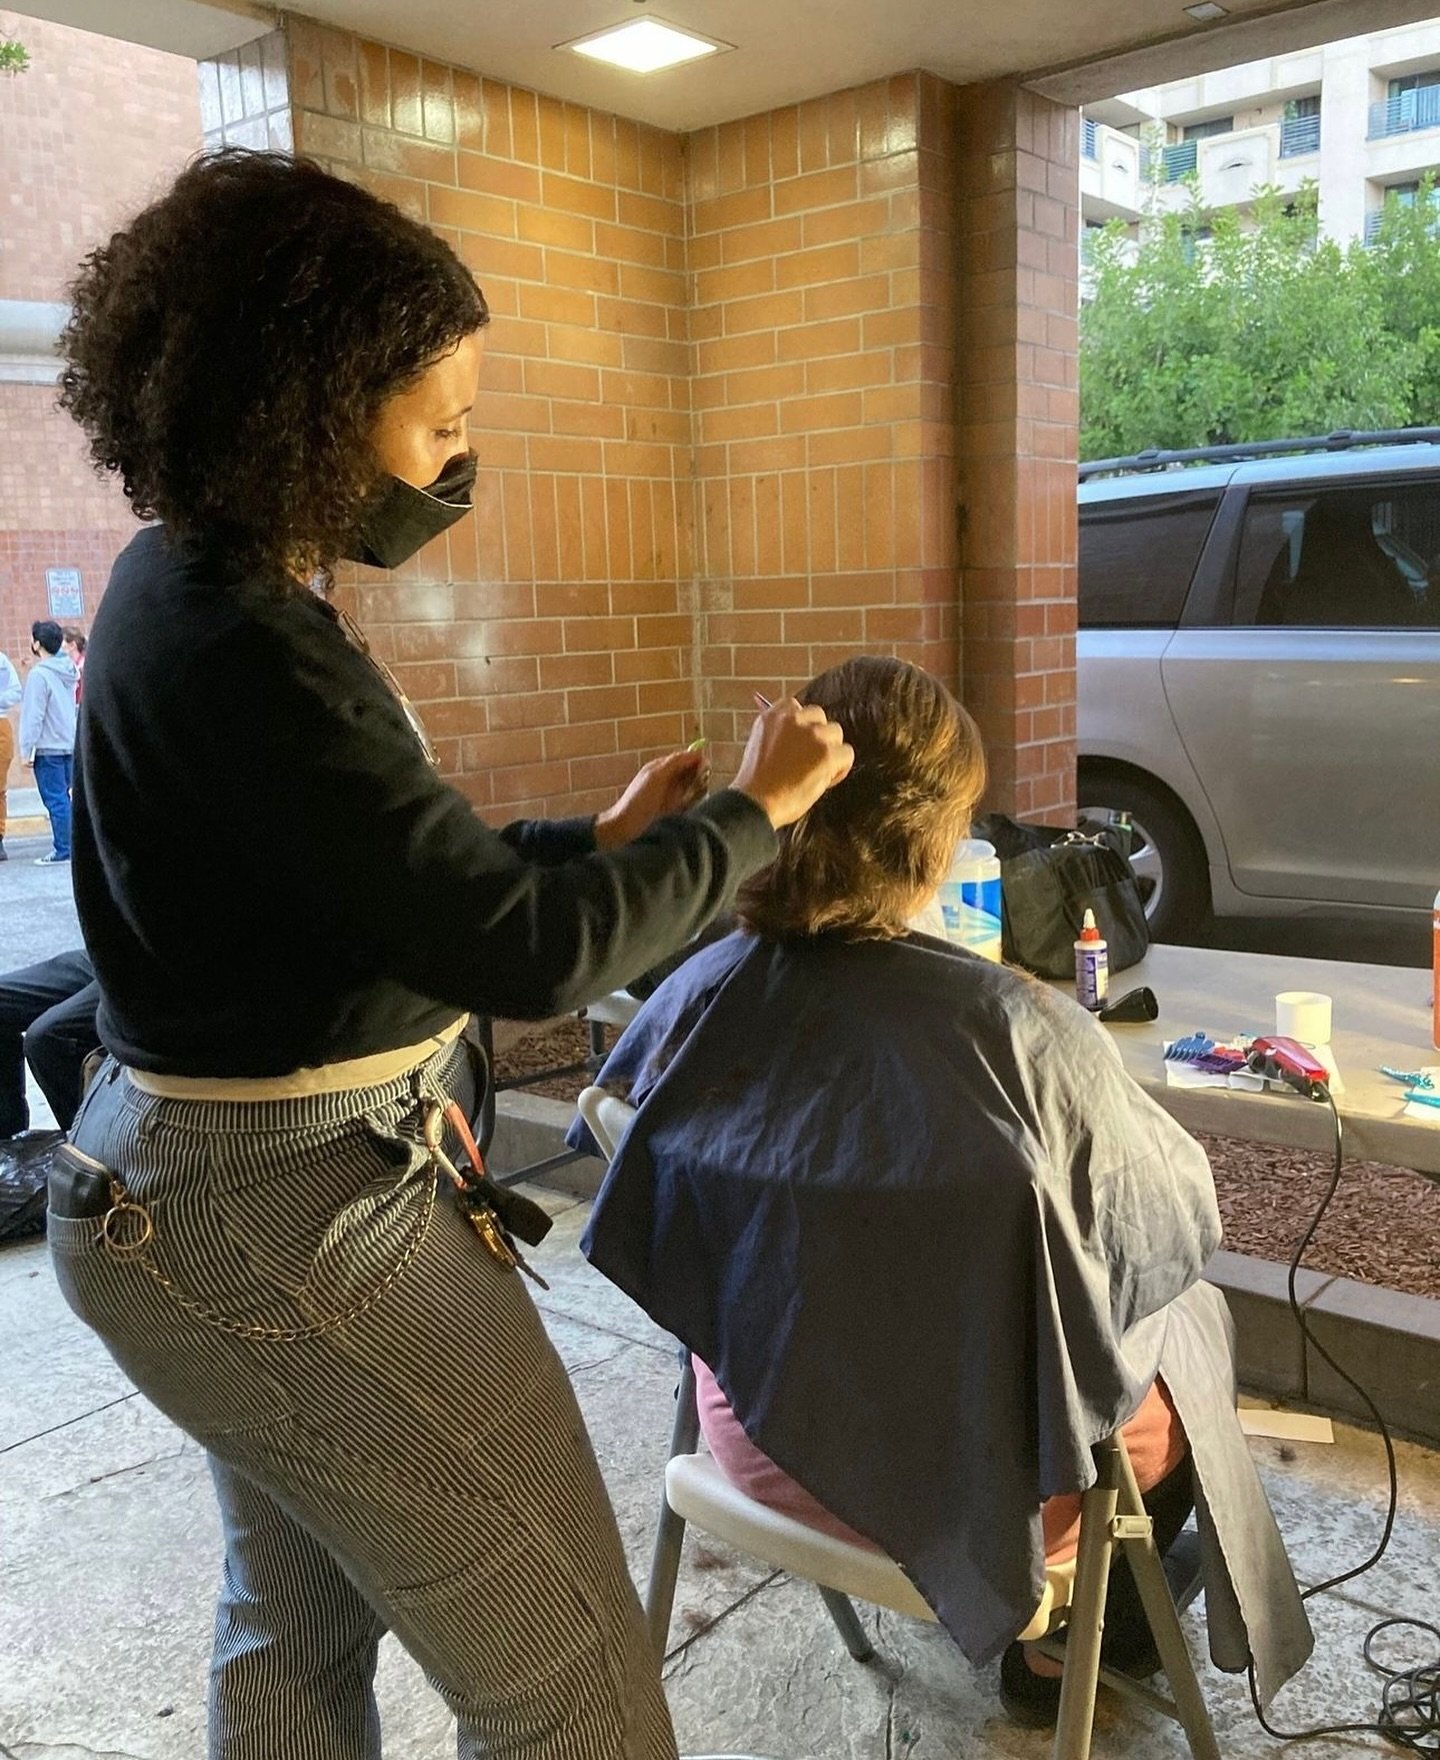 Ramdasha (@ramdasha) donating time to give haircuts to people in need with the Hollywood Food Co. The mission of Hollywood Food Coalition is to feed and serve the immediate needs of the hungry every day of the year so they can build better lives. The